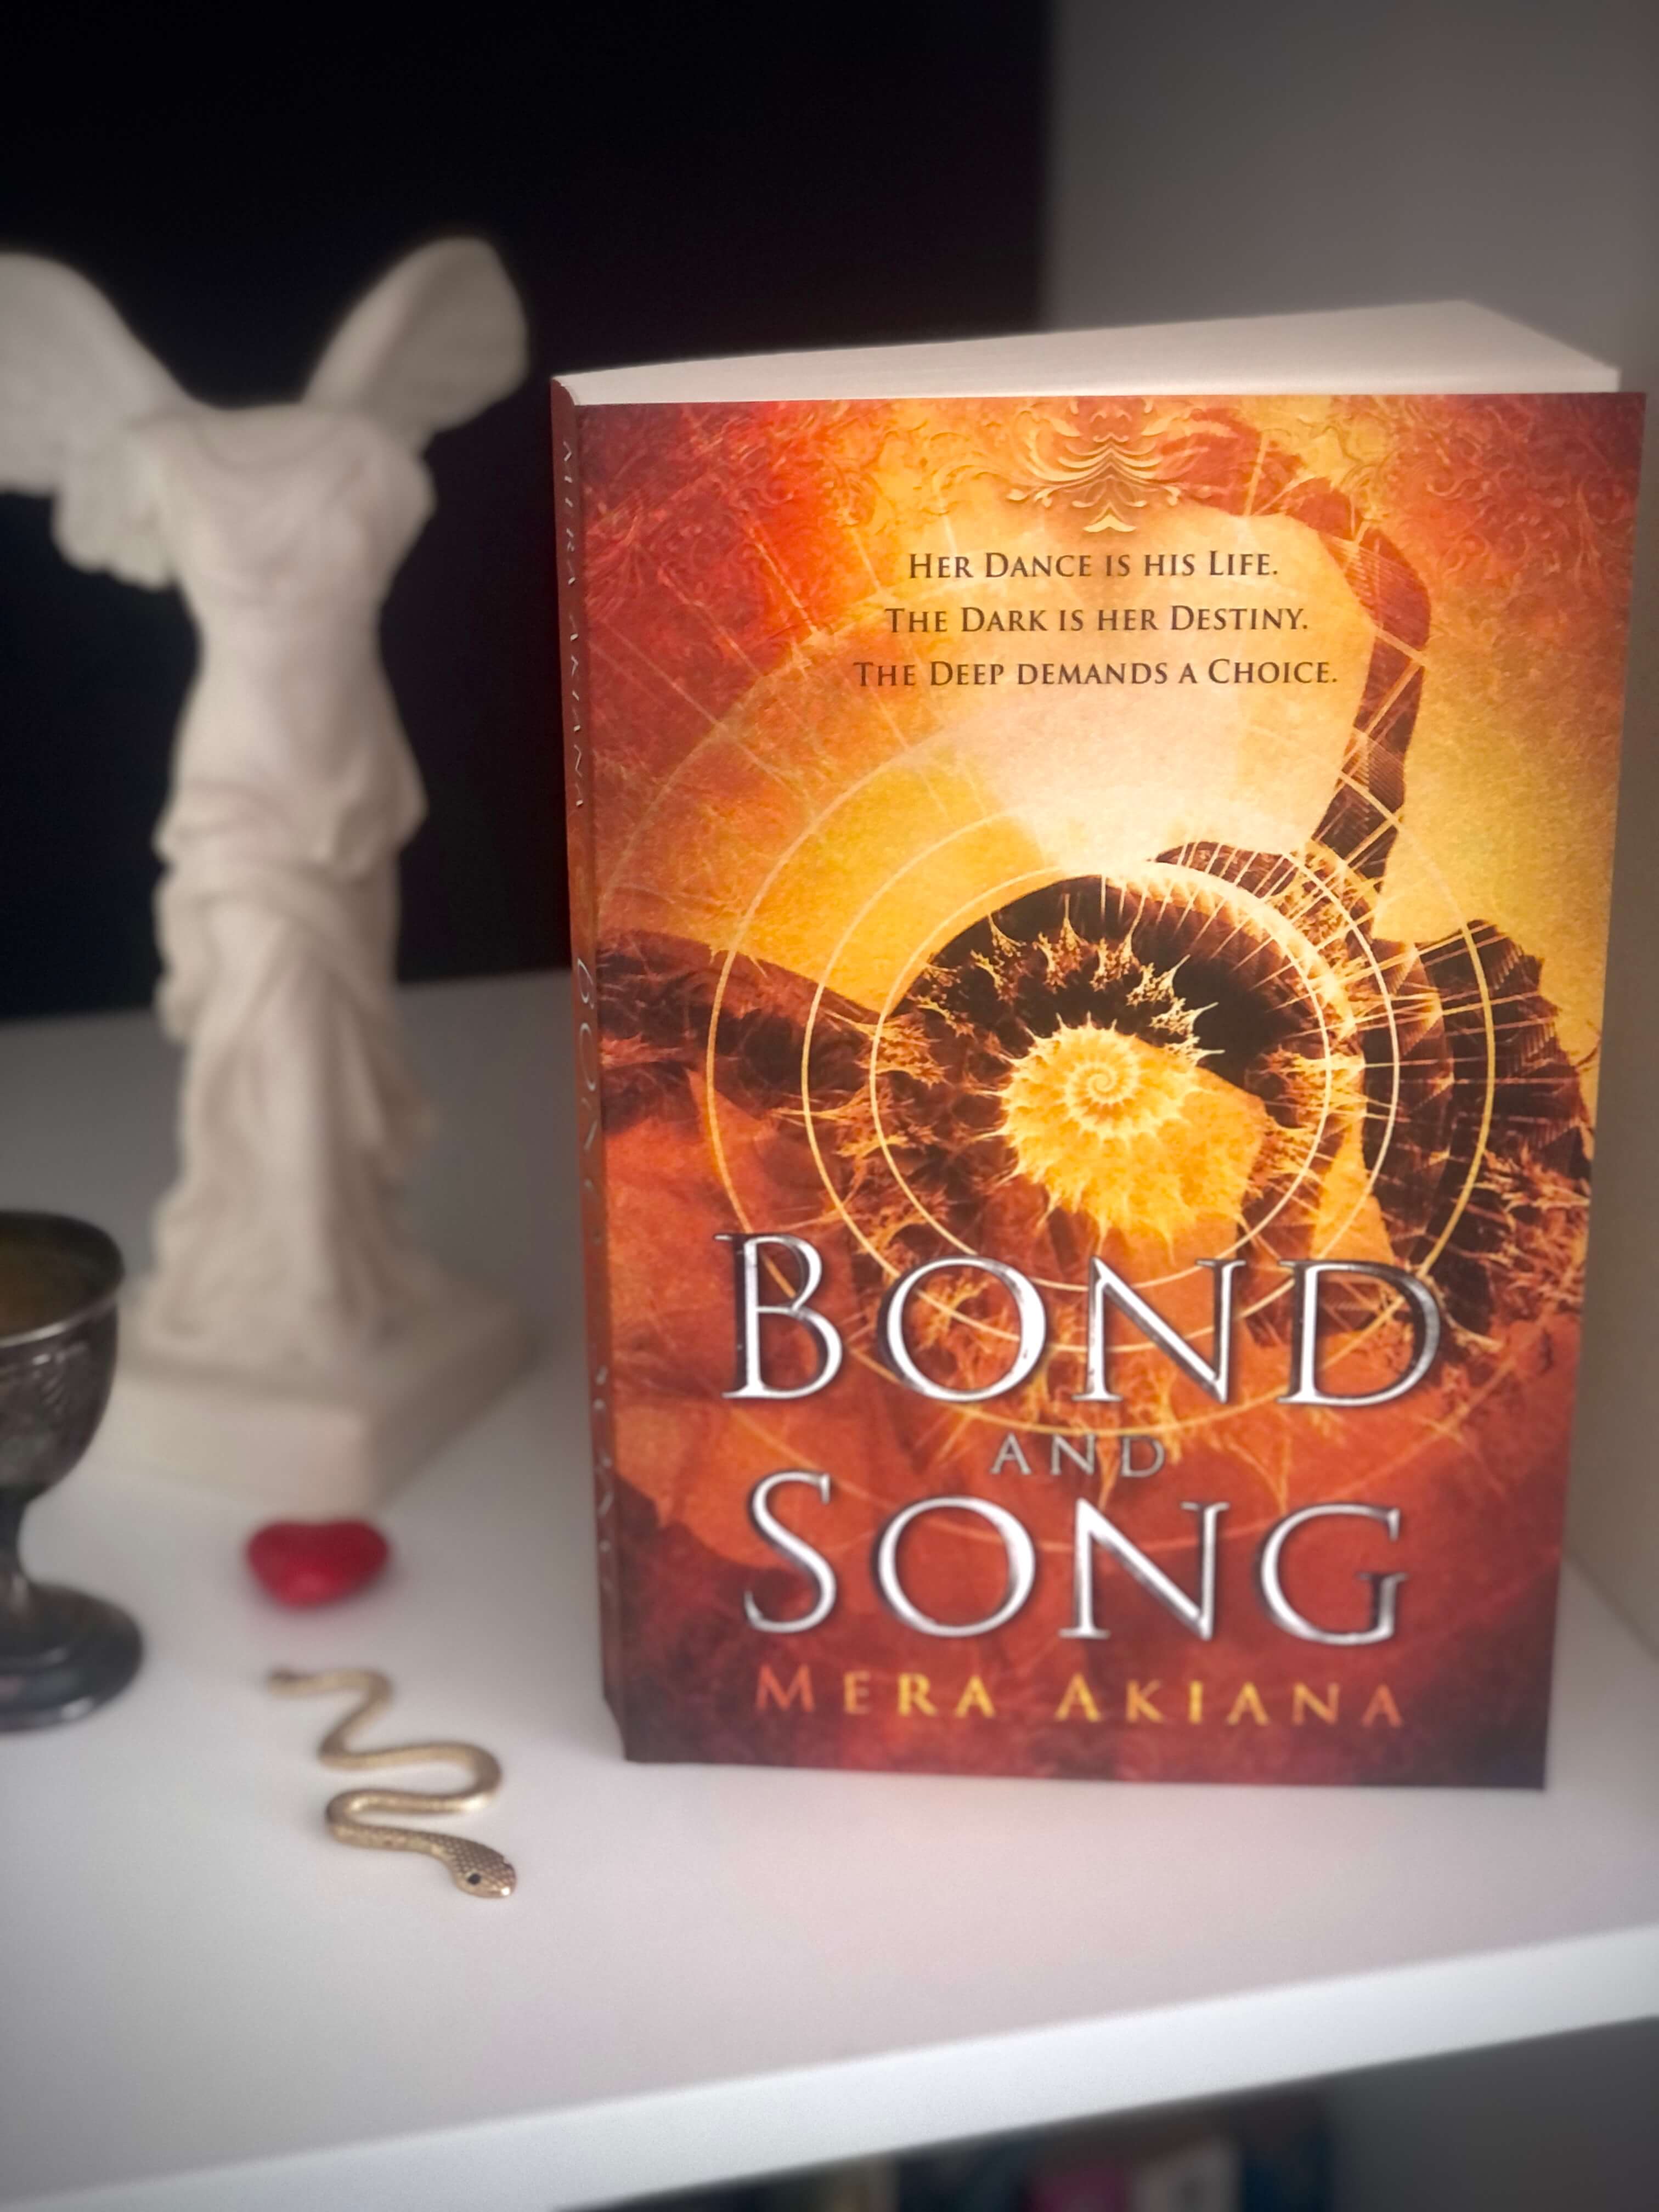 paperback of novel Bond and Song with decorative items